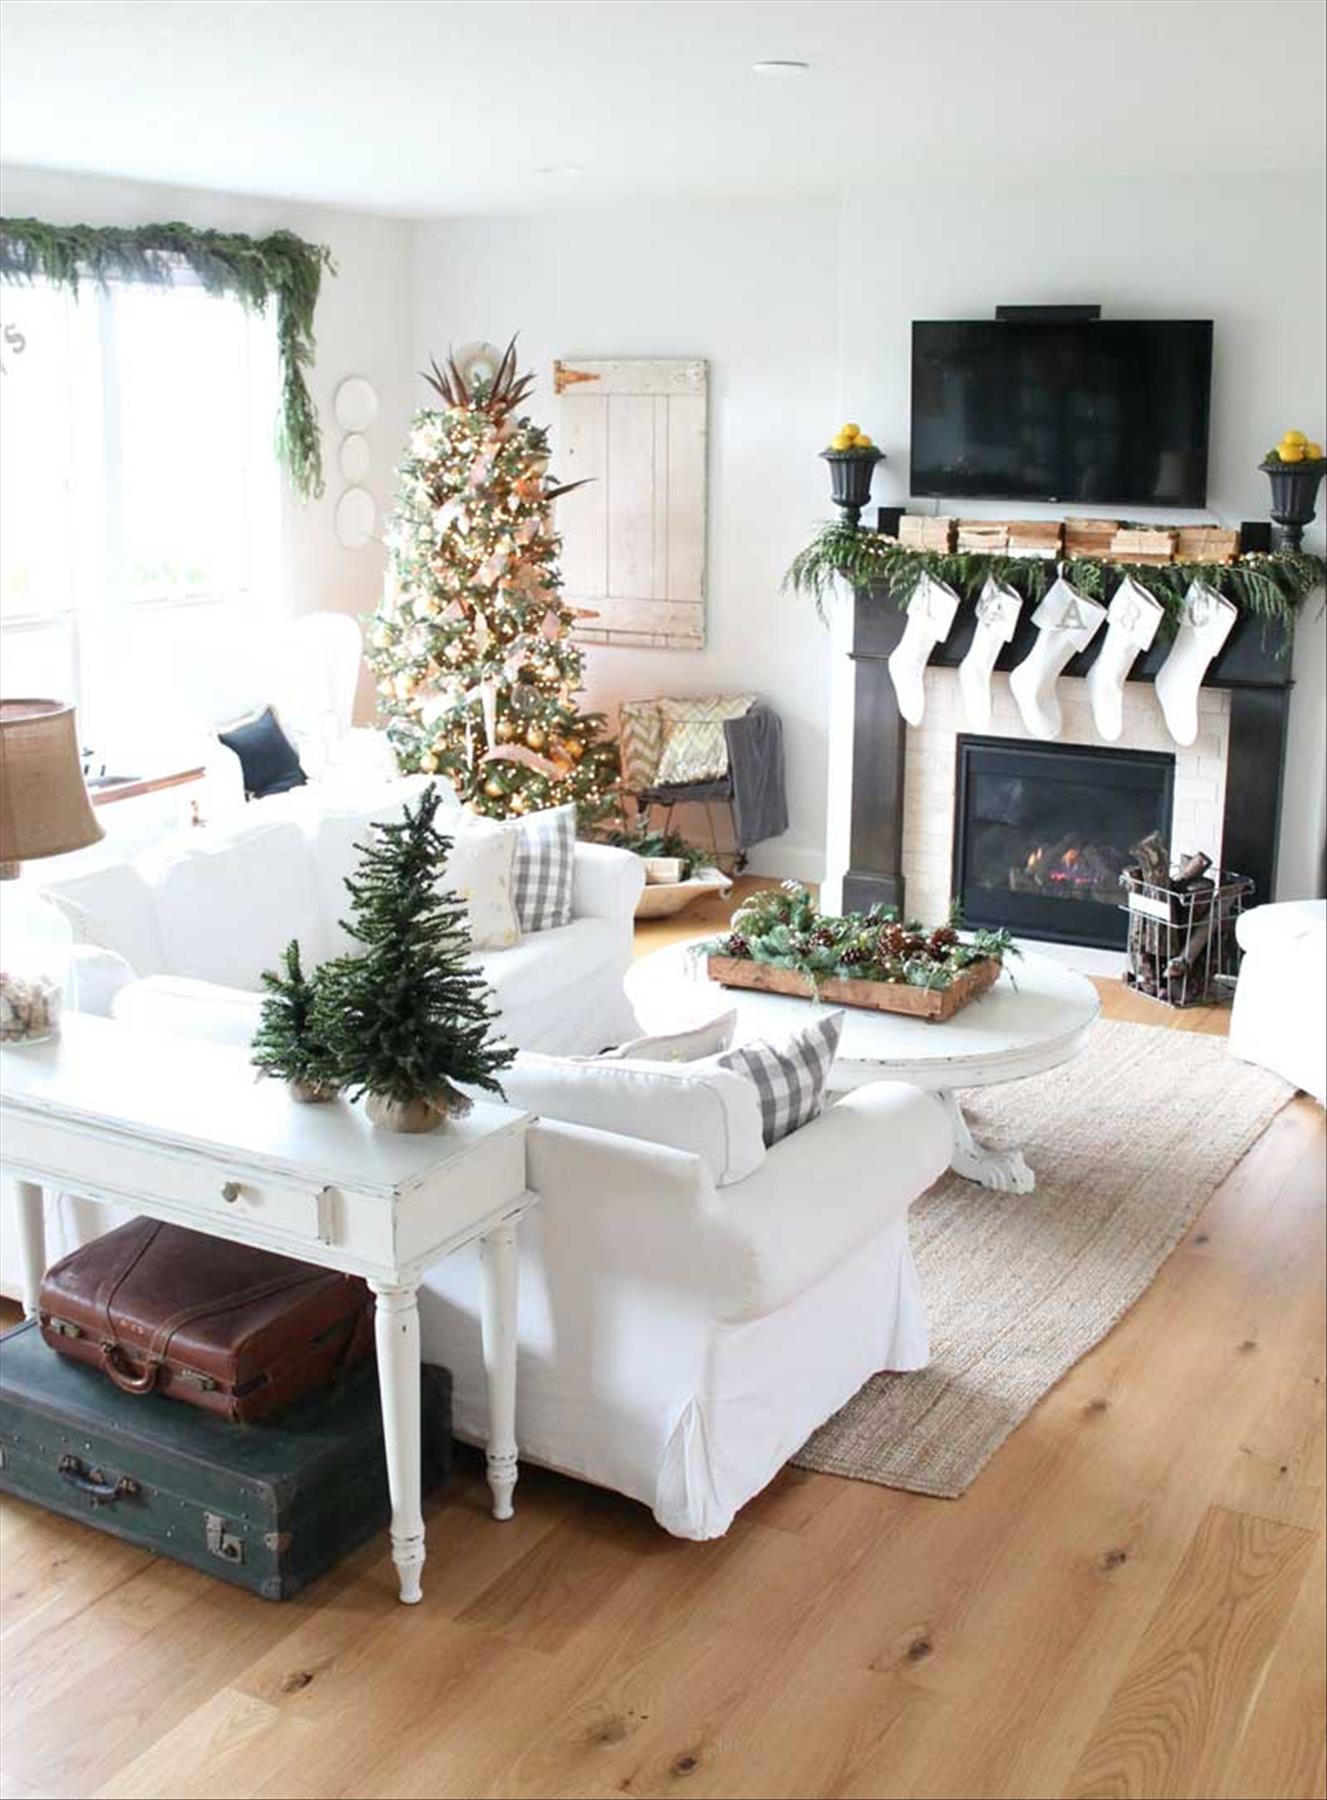 Cozy Christmas fireplace decor ideas to Warm Your Holiday